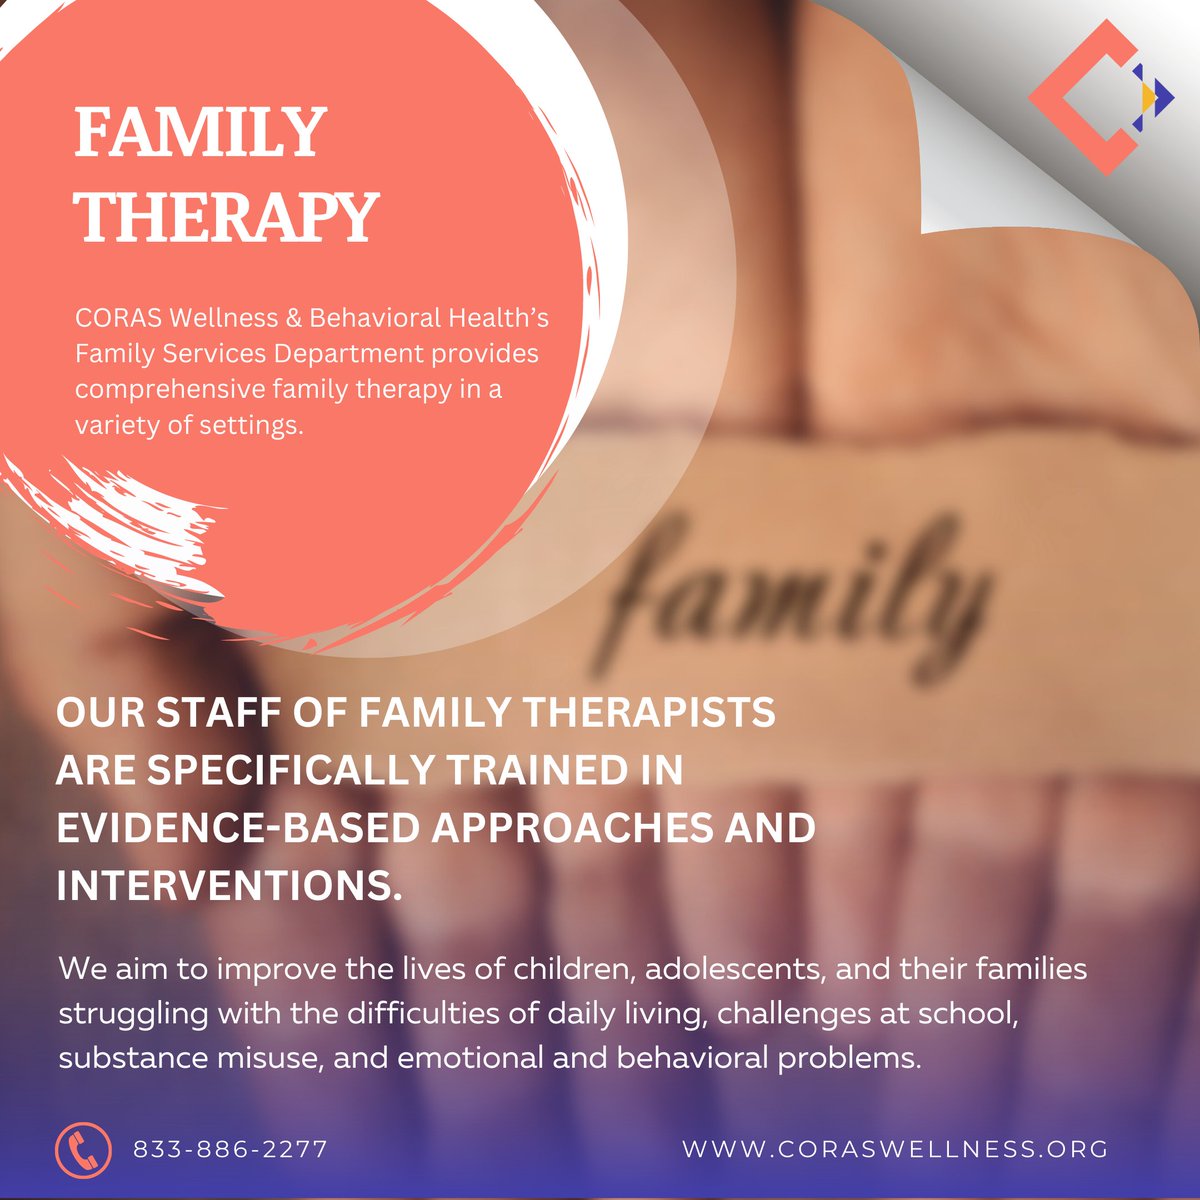 Do you have a family problem? Our parent-child therapy services can help. 

📍coraswellness.org

#addiction #treatment #recovery #recoveryprocess #successful #success #treatmentprogram #addiction #addictionisreal #addictionhelp #addictionkills #addictionawareness